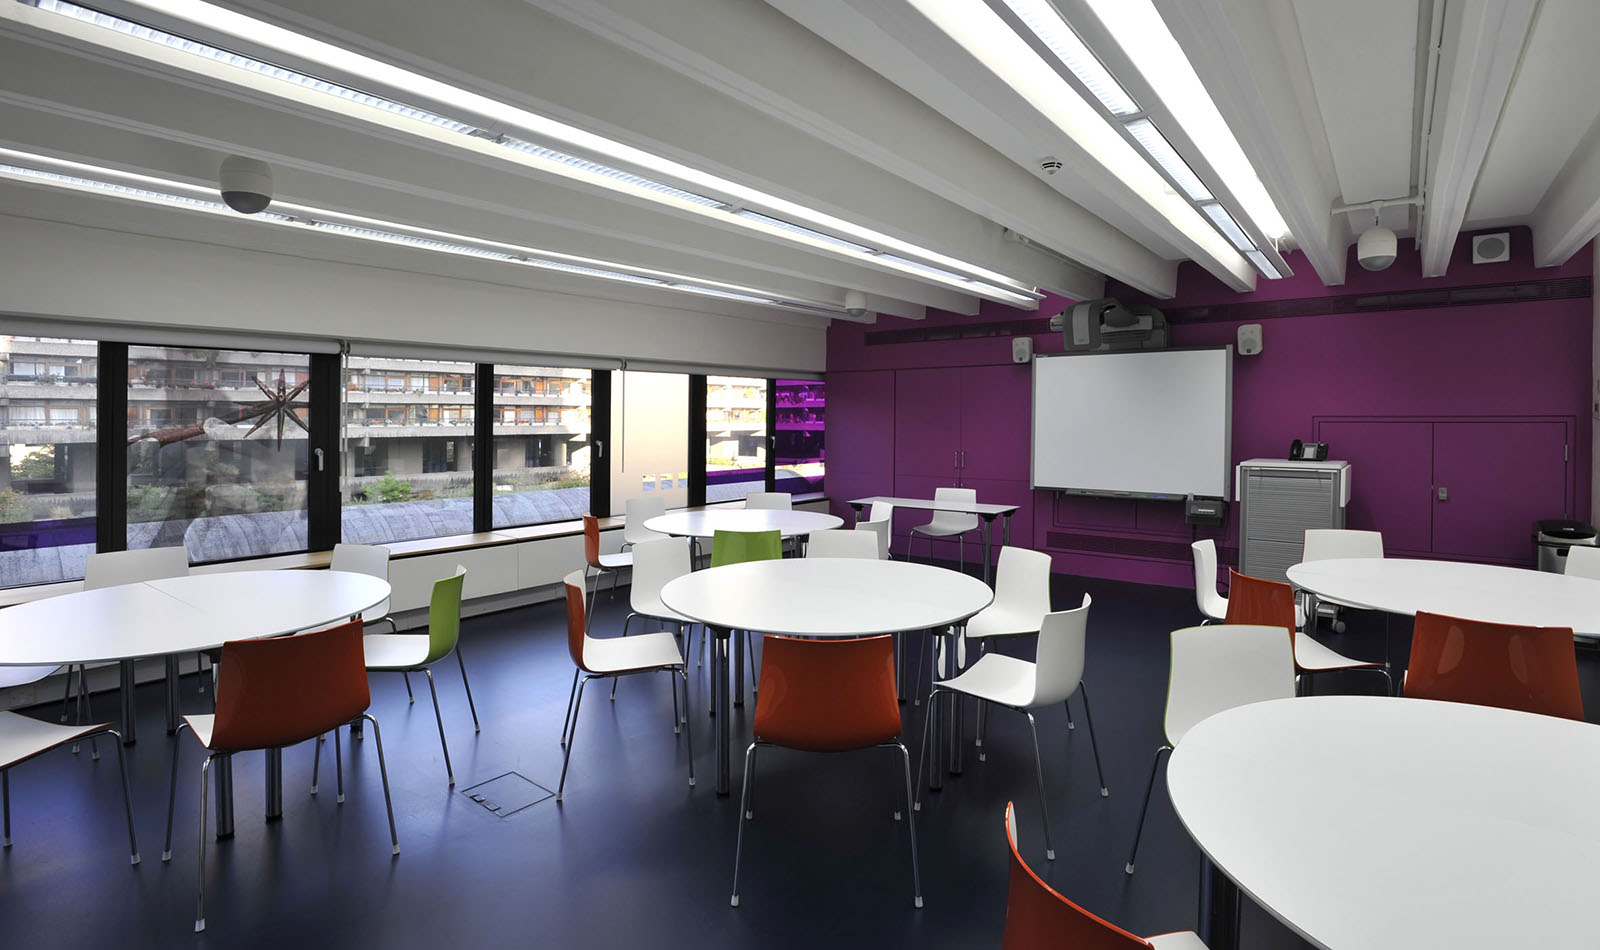 Activity Space 2 in the Clore Learning Centre in the Museum of London, as part of the museum's venue hire offer